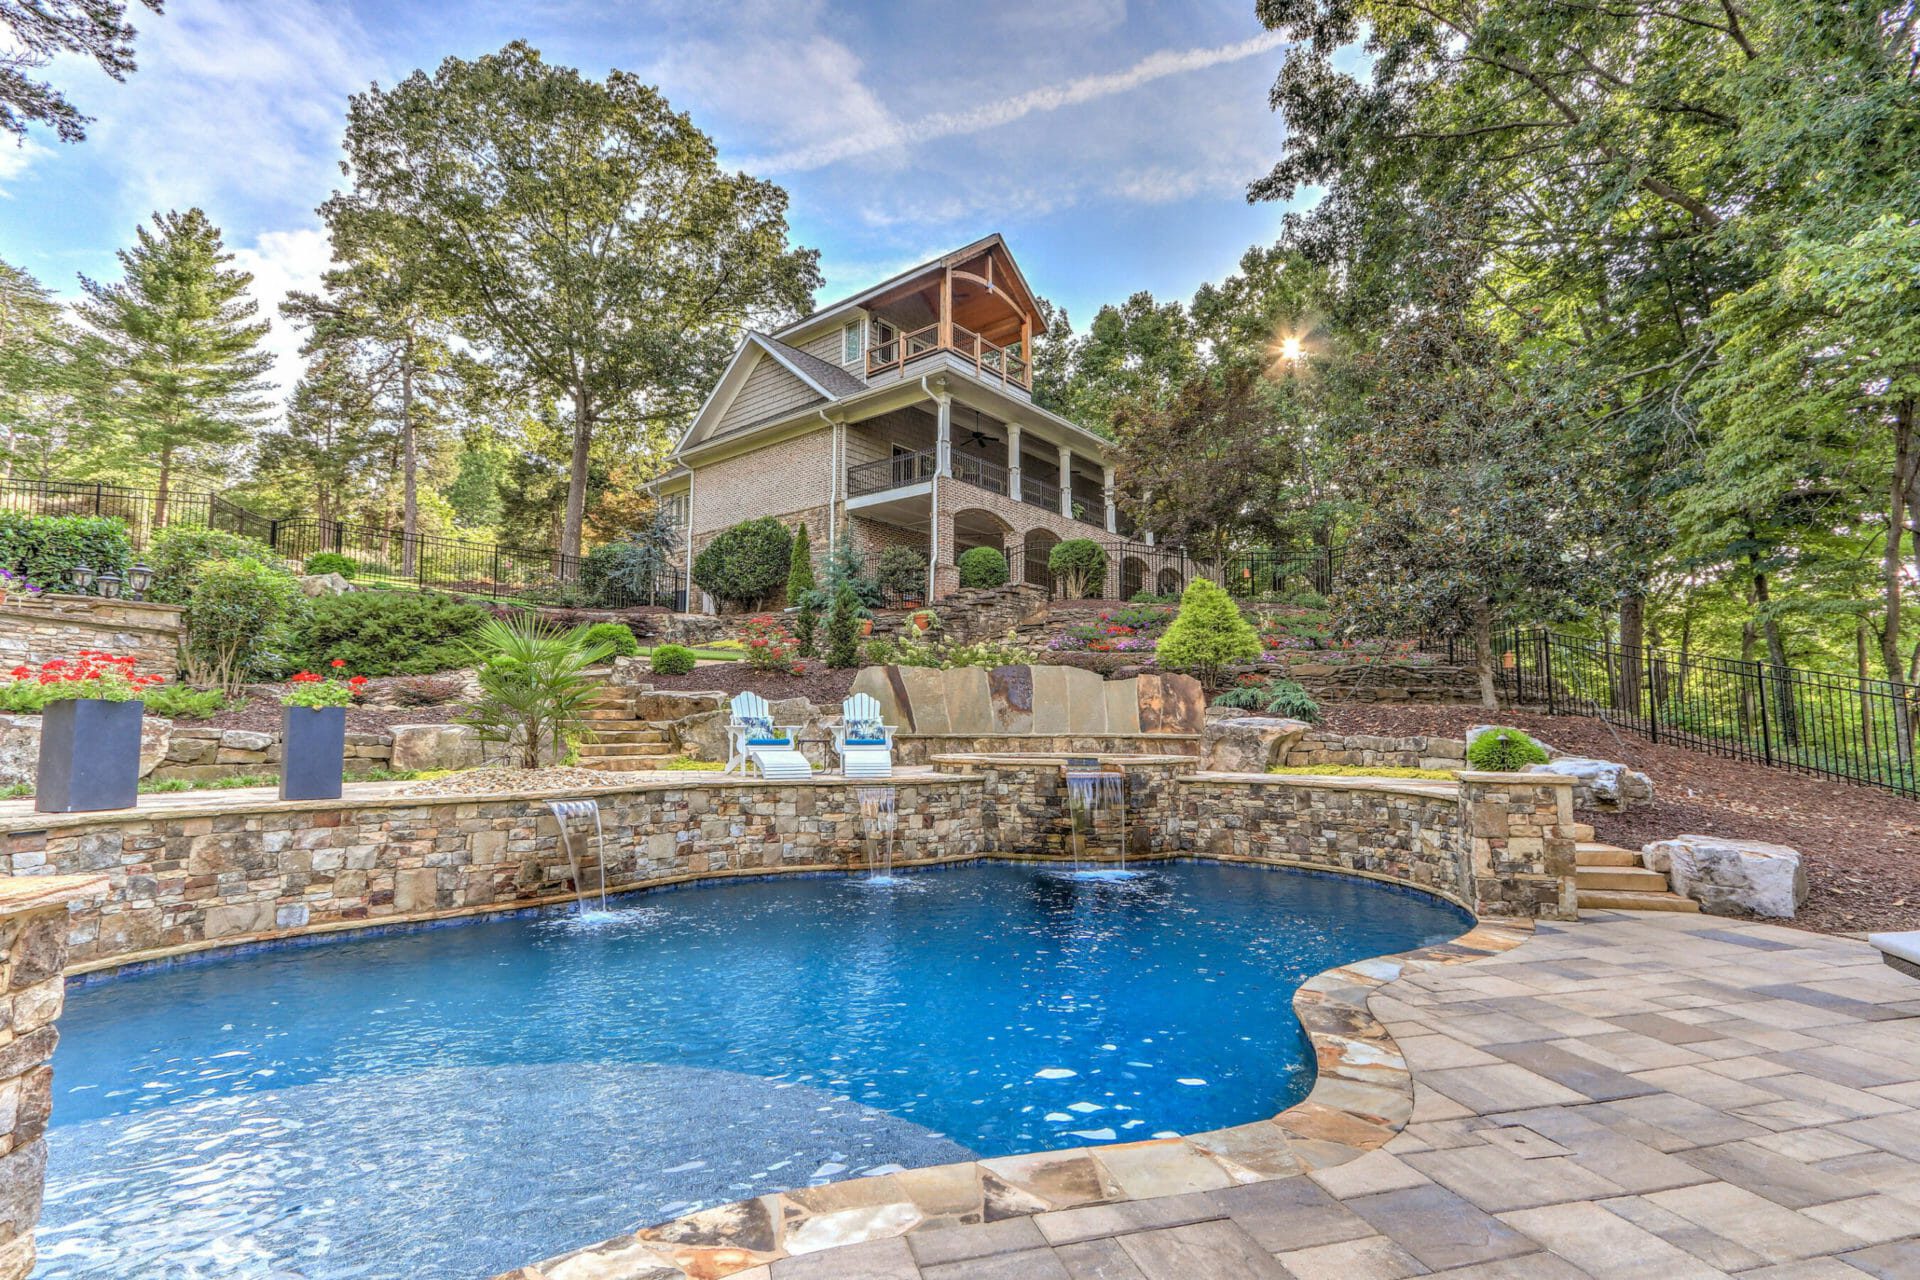 Large patio with pool in Flowery Branch